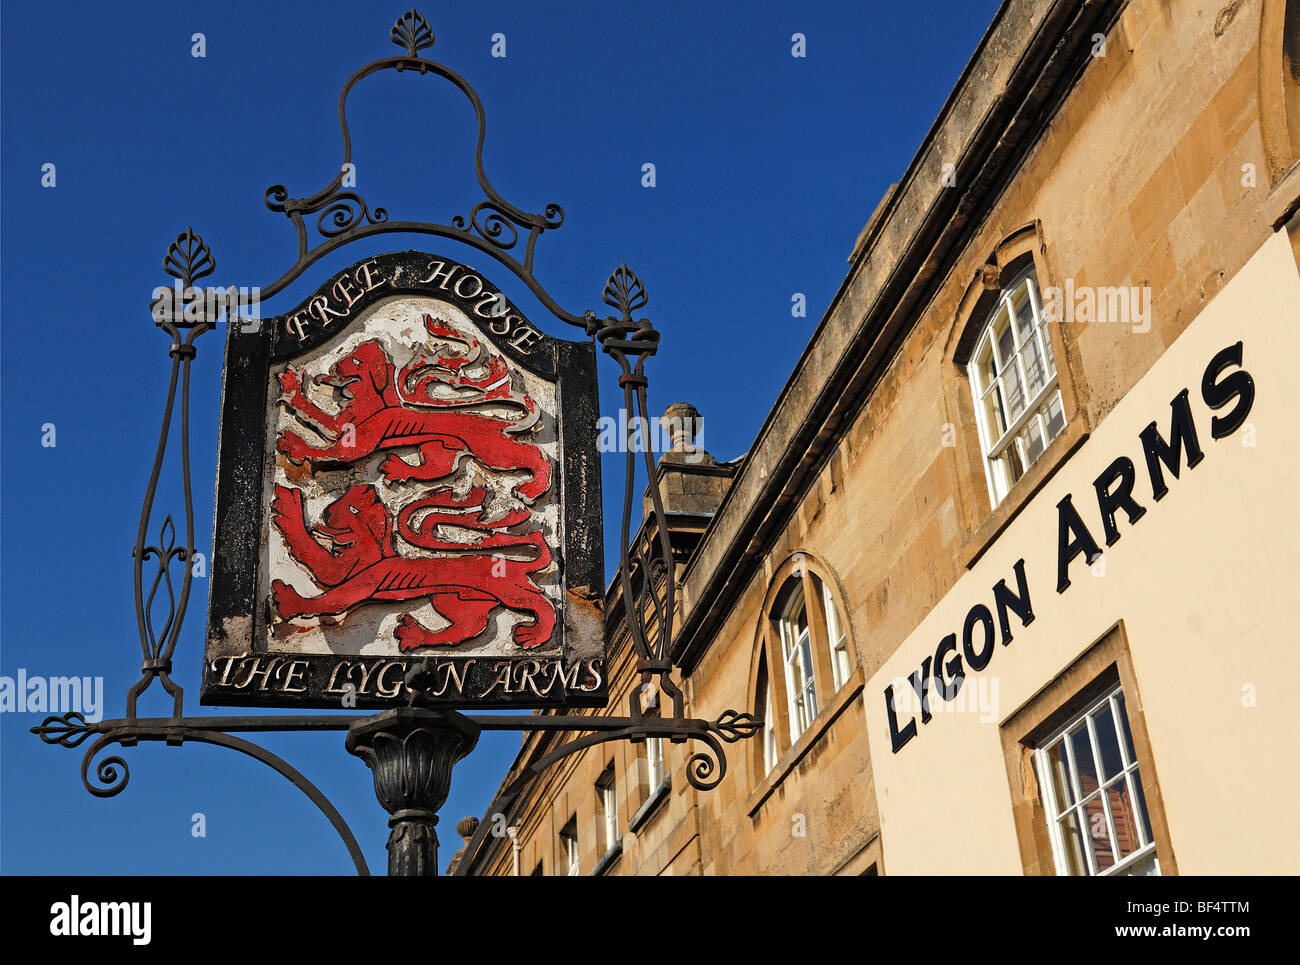 Old inn and hotel sign, The Lygon Arms, 16th Century, High Street, Chipping Campden, Gloucestershire, England, United Kingdom,  Stock Photo